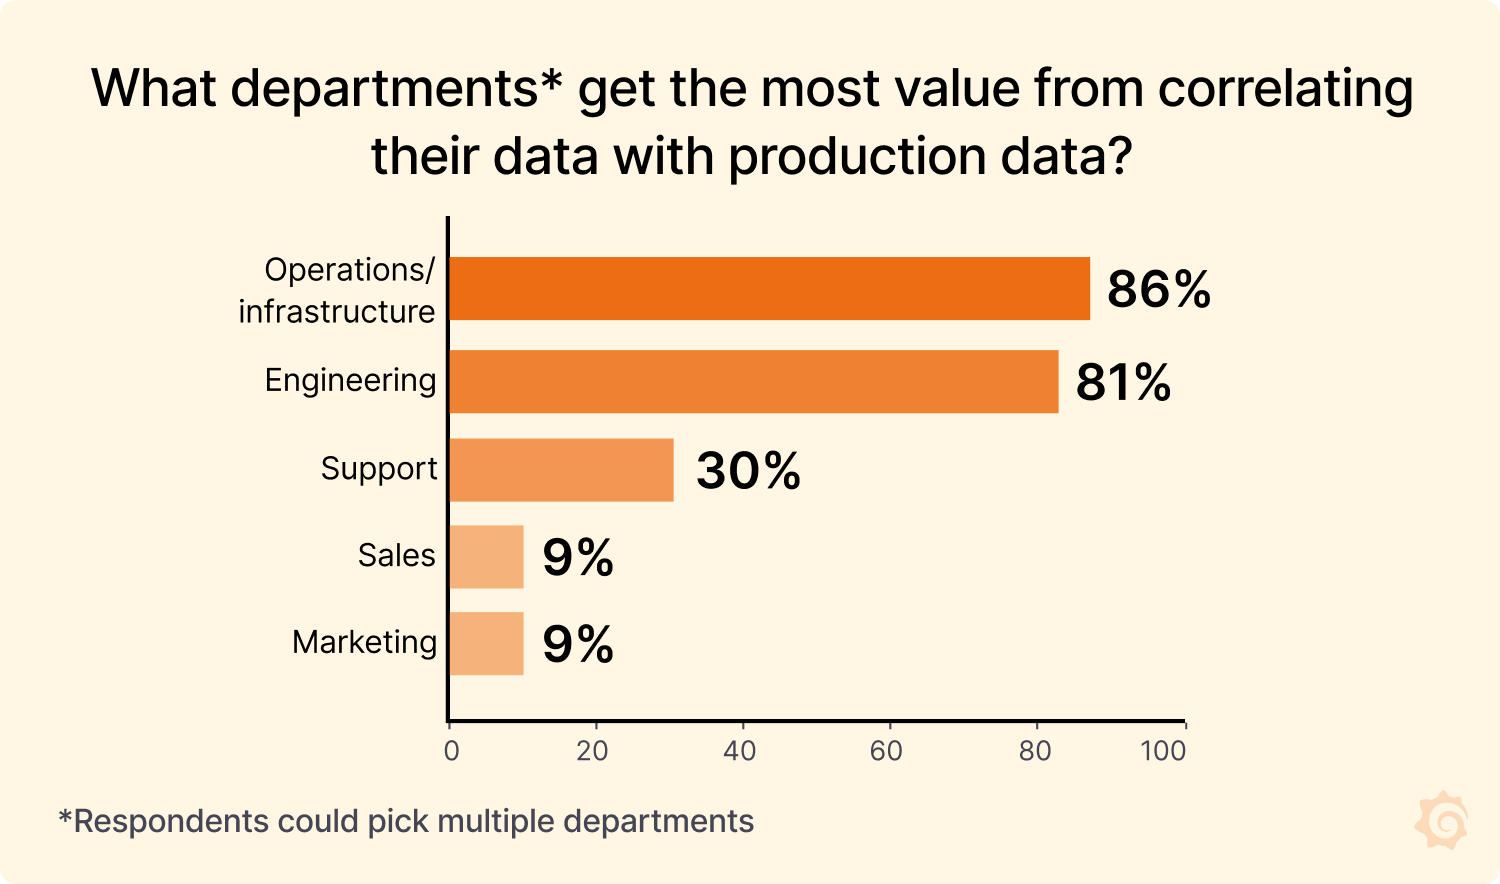 Bar chart showing departments that benefit from correlating production data.